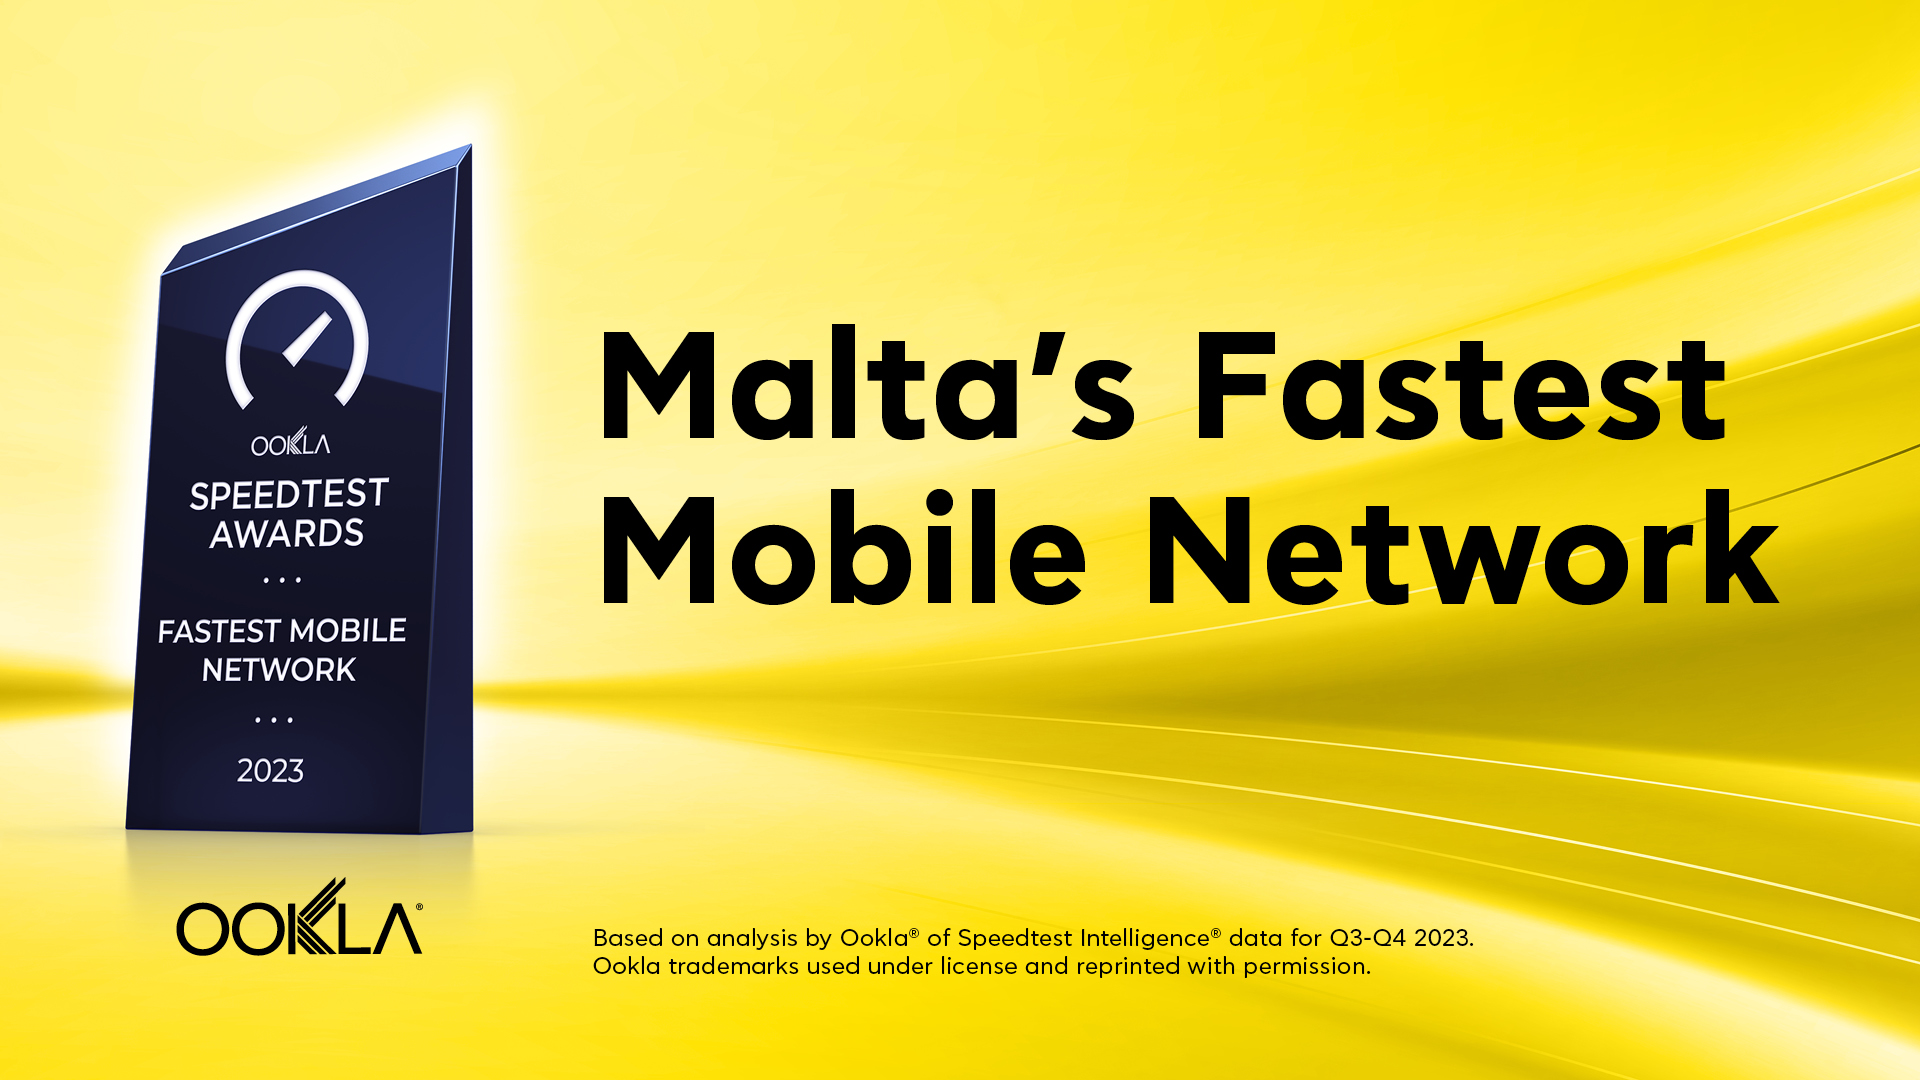 Epic’s New Network Named Malta’s Fastest by Ookla